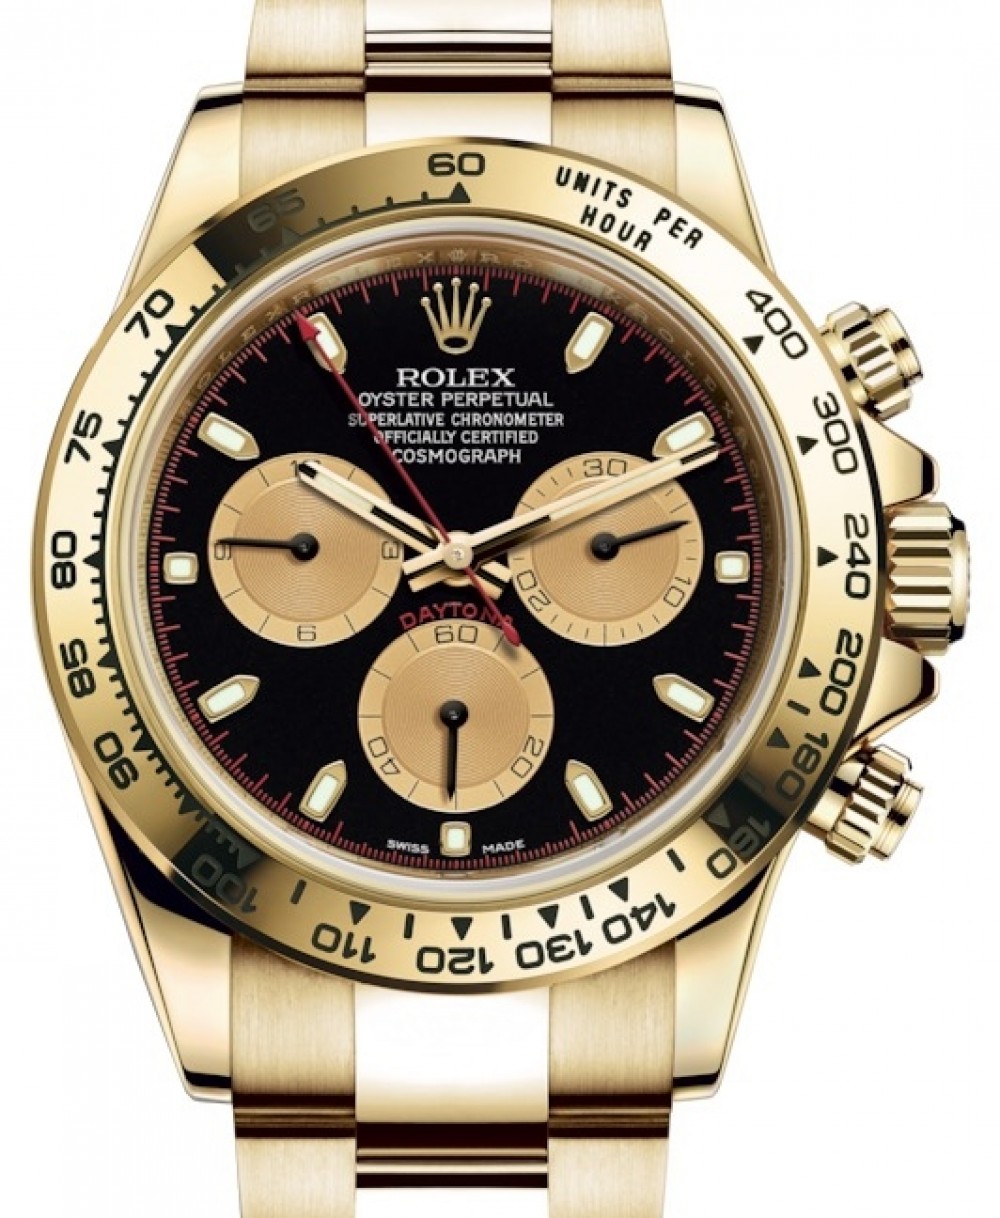 Rolex Cosmograph Daytona 116508 Black Index Champagne Tachymetre Yellow Gold  Oyster BRAND NEW